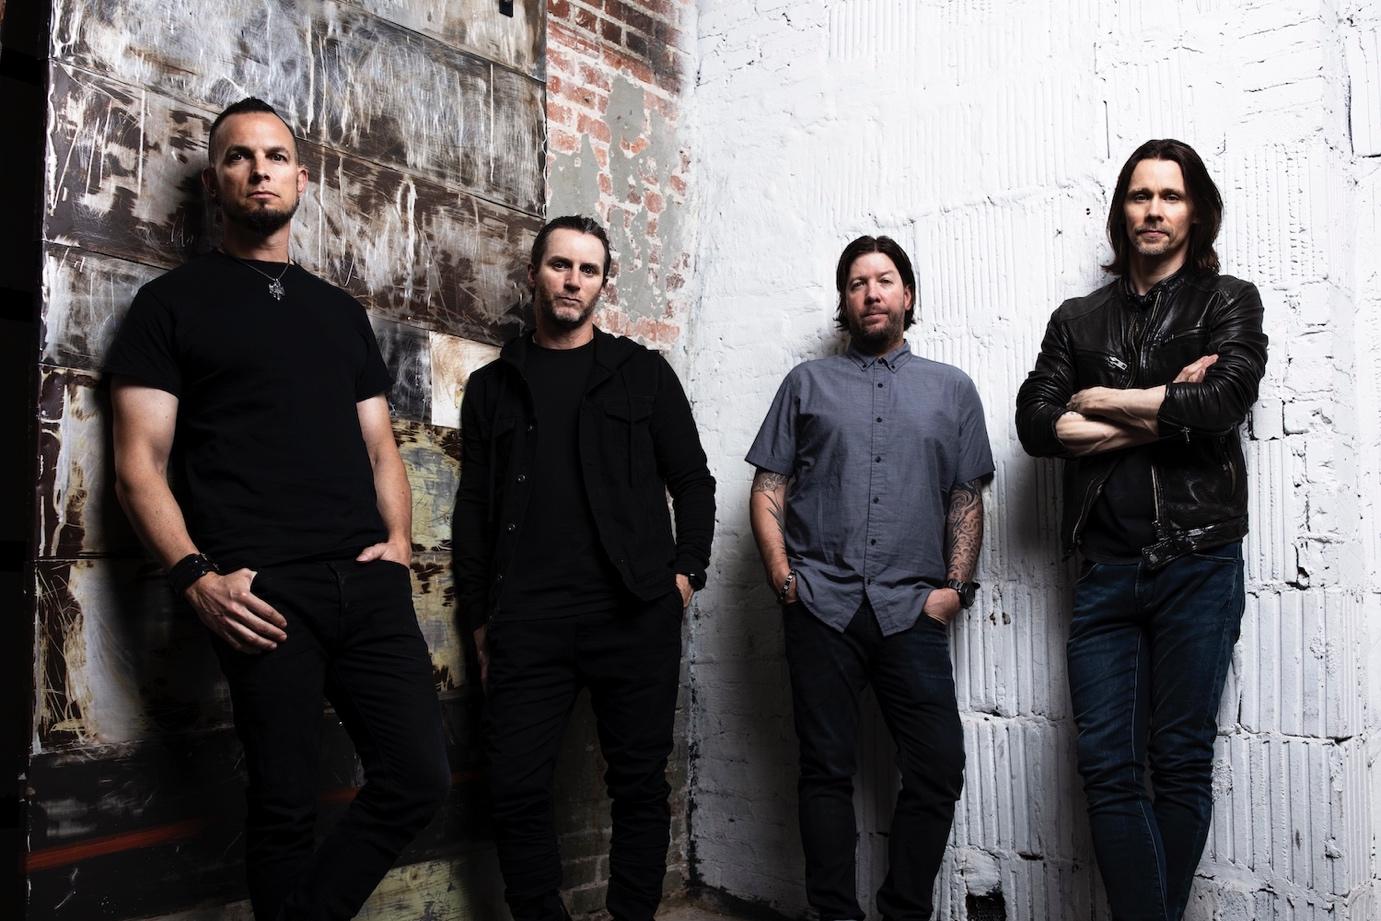 Alter Bridge Jump "In The Deep" With New Song and Lyric Video